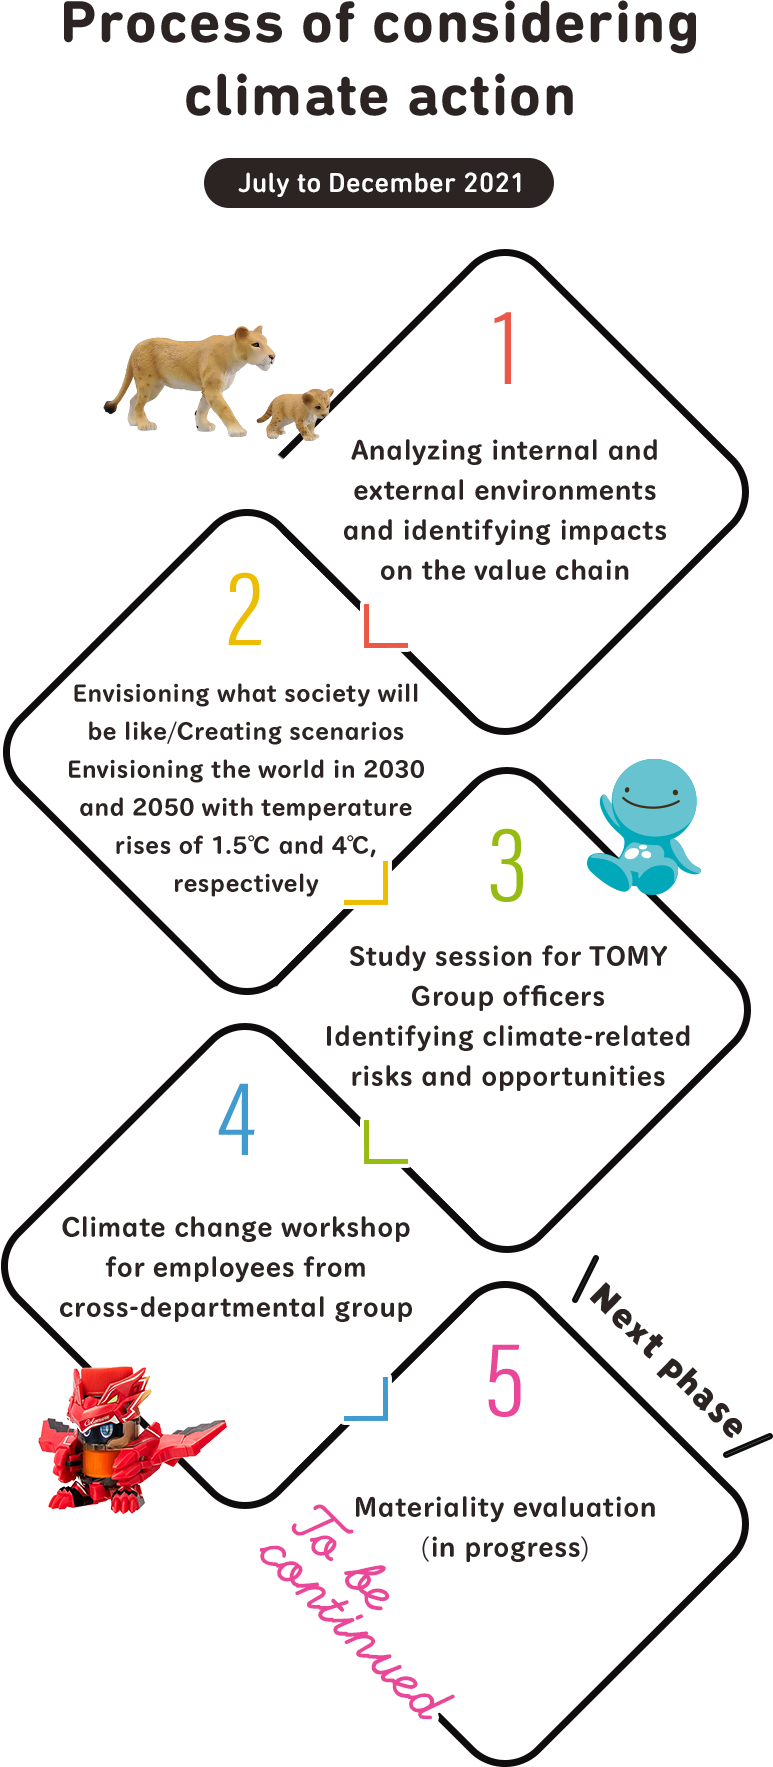 Process of considering climate action (July to December 2021)